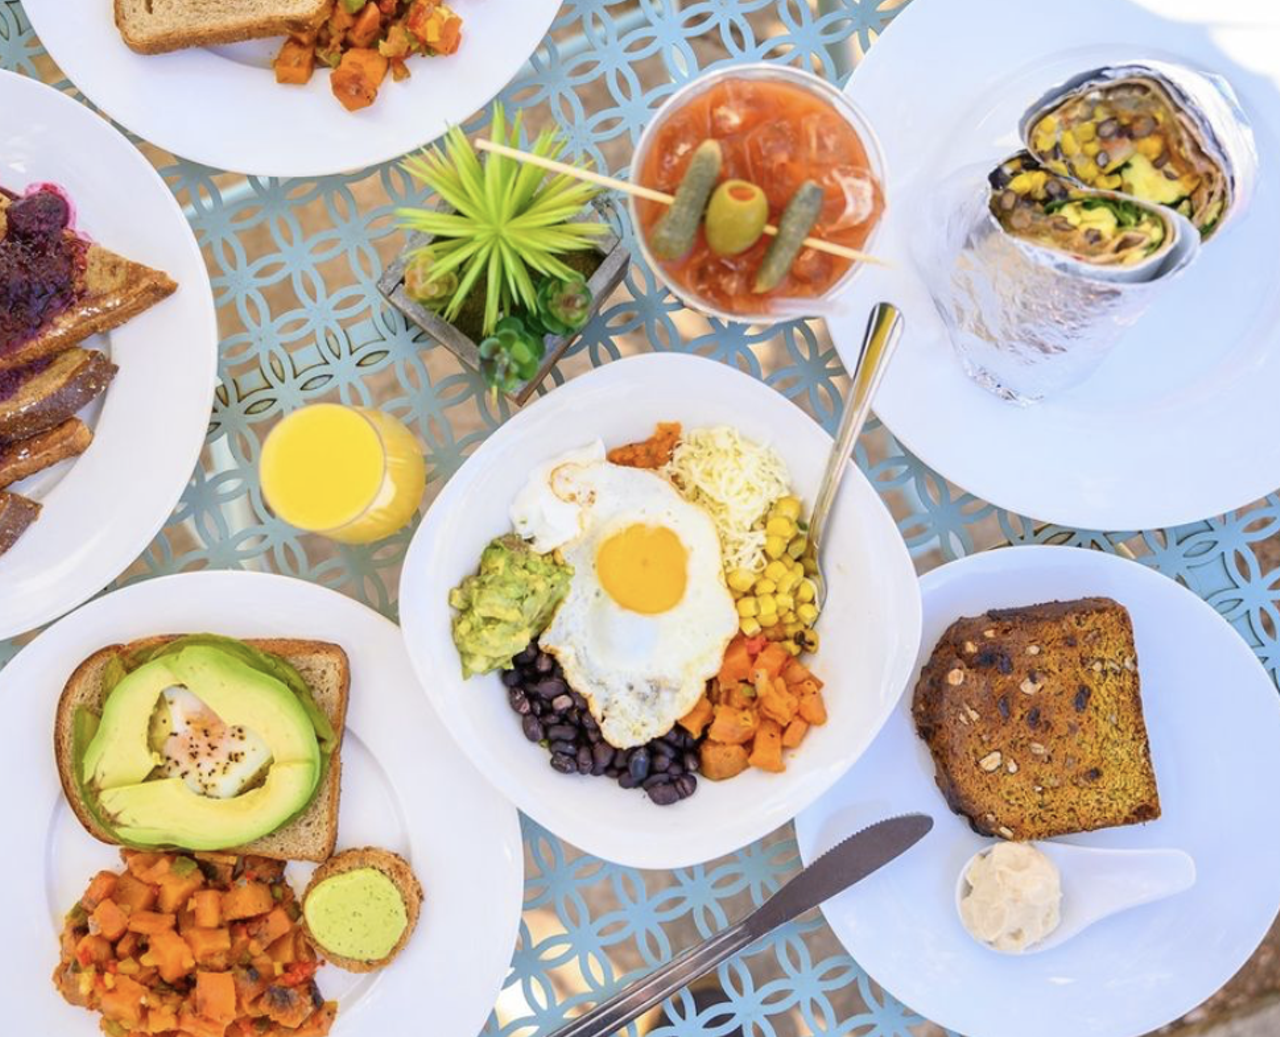 The Good Kind Southtown
1127 S St Mary's St, (210) 801-5892, eatgoodkind.com
The Good Kind uses sustainably sourced ingredients to create light offerings that are big on flavor. The tasty menu shows that eating healthy doesn’t mean you have to give up brunch.
Photo via Instagram / goodkindsouthtown